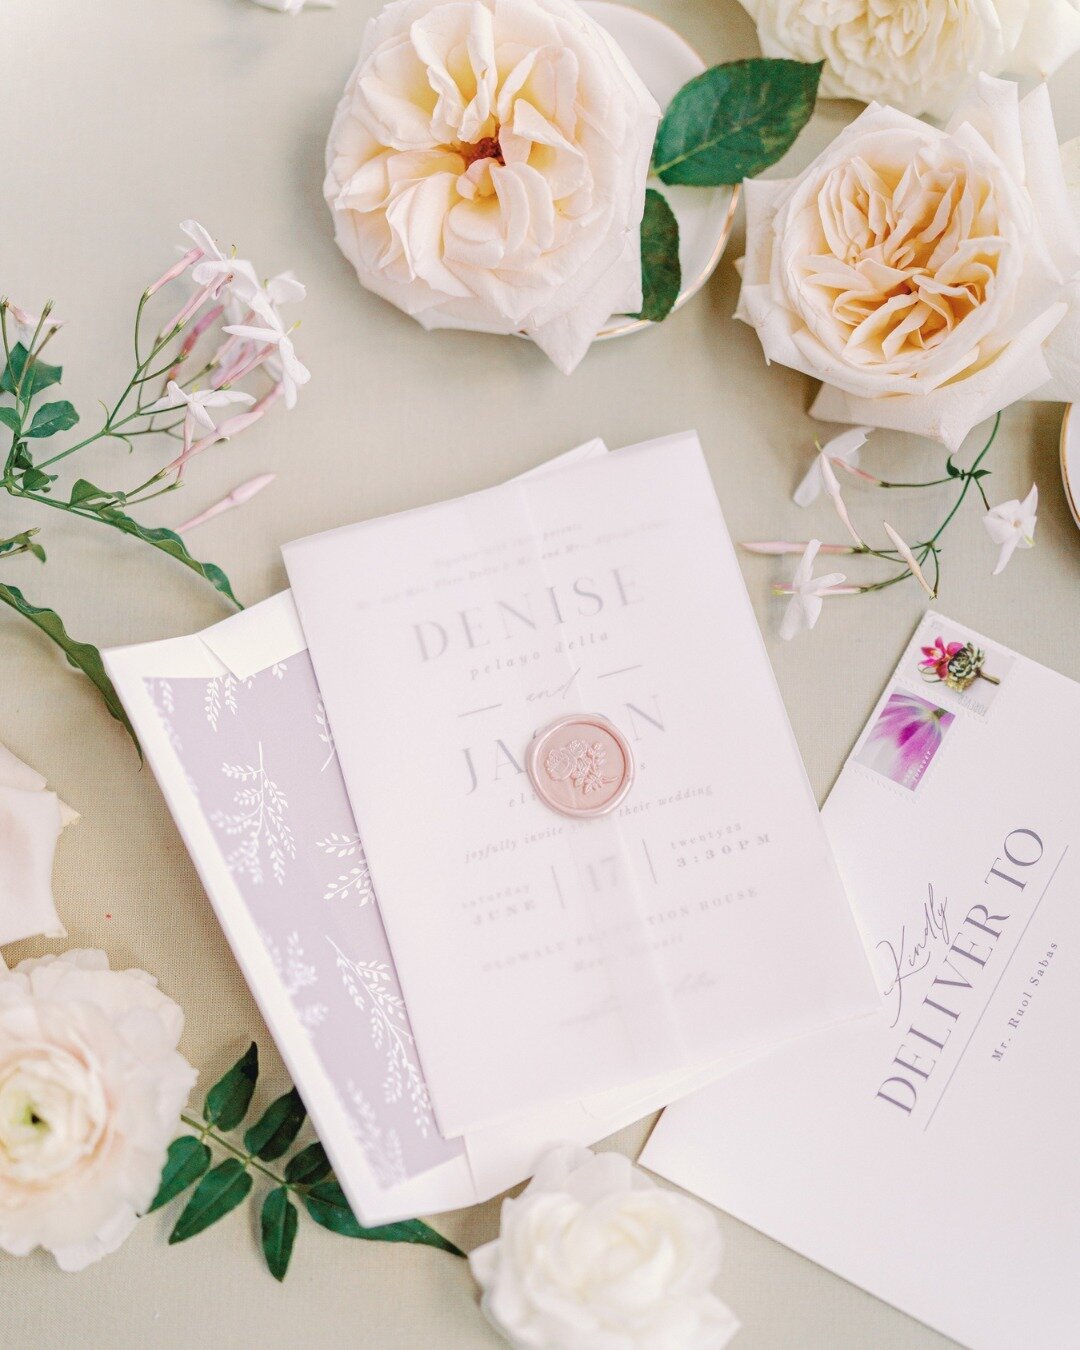 ⁠From the wedding invite to floral arrangements and place settings, all the details came together so perfectly to tell Denise and Jason's sweet love story.⁠
⁠
Planning and Design: @opihilove⁠
Photography: @ashleygoodwinphoto ⁠
Videography: @islemedia